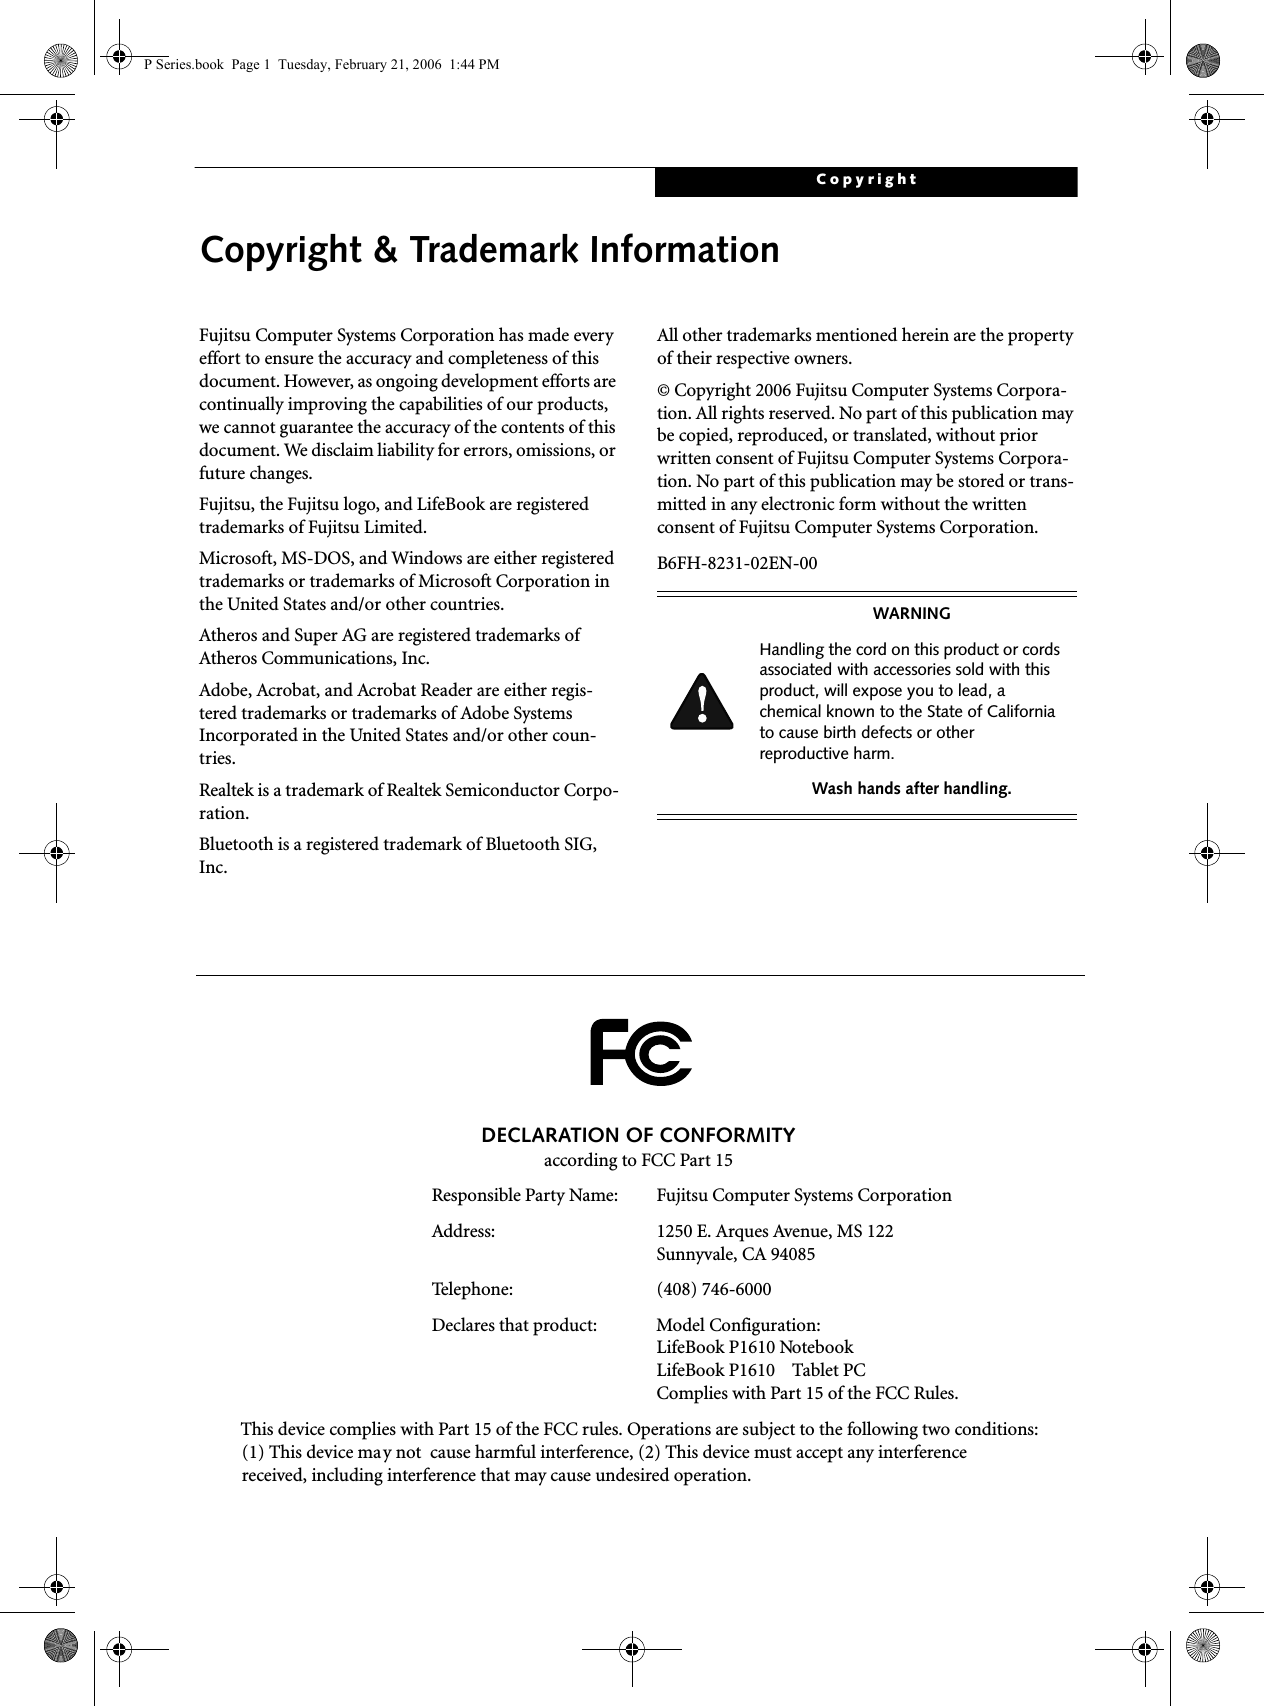 CopyrightCopyright &amp; Trademark InformationFujitsu Computer Systems Corporation has made every effort to ensure the accuracy and completeness of this document. However, as ongoing development efforts are continually improving the capabilities of our products, we cannot guarantee the accuracy of the contents of this document. We disclaim liability for errors, omissions, or future changes.Fujitsu, the Fujitsu logo, and LifeBook are registered trademarks of Fujitsu Limited.Microsoft, MS-DOS, and Windows are either registered trademarks or trademarks of Microsoft Corporation in the United States and/or other countries.Atheros and Super AG are registered trademarks of Atheros Communications, Inc.Adobe, Acrobat, and Acrobat Reader are either regis-tered trademarks or trademarks of Adobe Systems Incorporated in the United States and/or other coun-tries.Realtek is a trademark of Realtek Semiconductor Corpo-ration.Bluetooth is a registered trademark of Bluetooth SIG, Inc.All other trademarks mentioned herein are the property of their respective owners.© Copyright 2006 Fujitsu Computer Systems Corpora-tion. All rights reserved. No part of this publication may be copied, reproduced, or translated, without prior written consent of Fujitsu Computer Systems Corpora-tion. No part of this publication may be stored or trans-mitted in any electronic form without the written consent of Fujitsu Computer Systems Corporation.B6FH-8231-02EN-00WARNINGHandling the cord on this product or cords associated with accessories sold with this product, will expose you to lead, a chemical known to the State of California to cause birth defects or other reproductive harm. Wash hands after handling.DECLARATION OF CONFORMITYaccording to FCC Part 15Responsible Party Name: Fujitsu Computer Systems CorporationAddress:  1250 E. Arques Avenue, MS 122Sunnyvale, CA 94085Telephone: (408) 746-6000Declares that product: Model Configuration:LifeBook P1610 Notebook LifeBook P1610    Tablet PCComplies with Part 15 of the FCC Rules.This device complies with Part 15 of the FCC rules. Operations are subject to the following two conditions:(1) This device may not  cause harmful interference, (2) This device must accept any interference received, including interference that may cause undesired operation.P Series.book  Page 1  Tuesday, February 21, 2006  1:44 PM